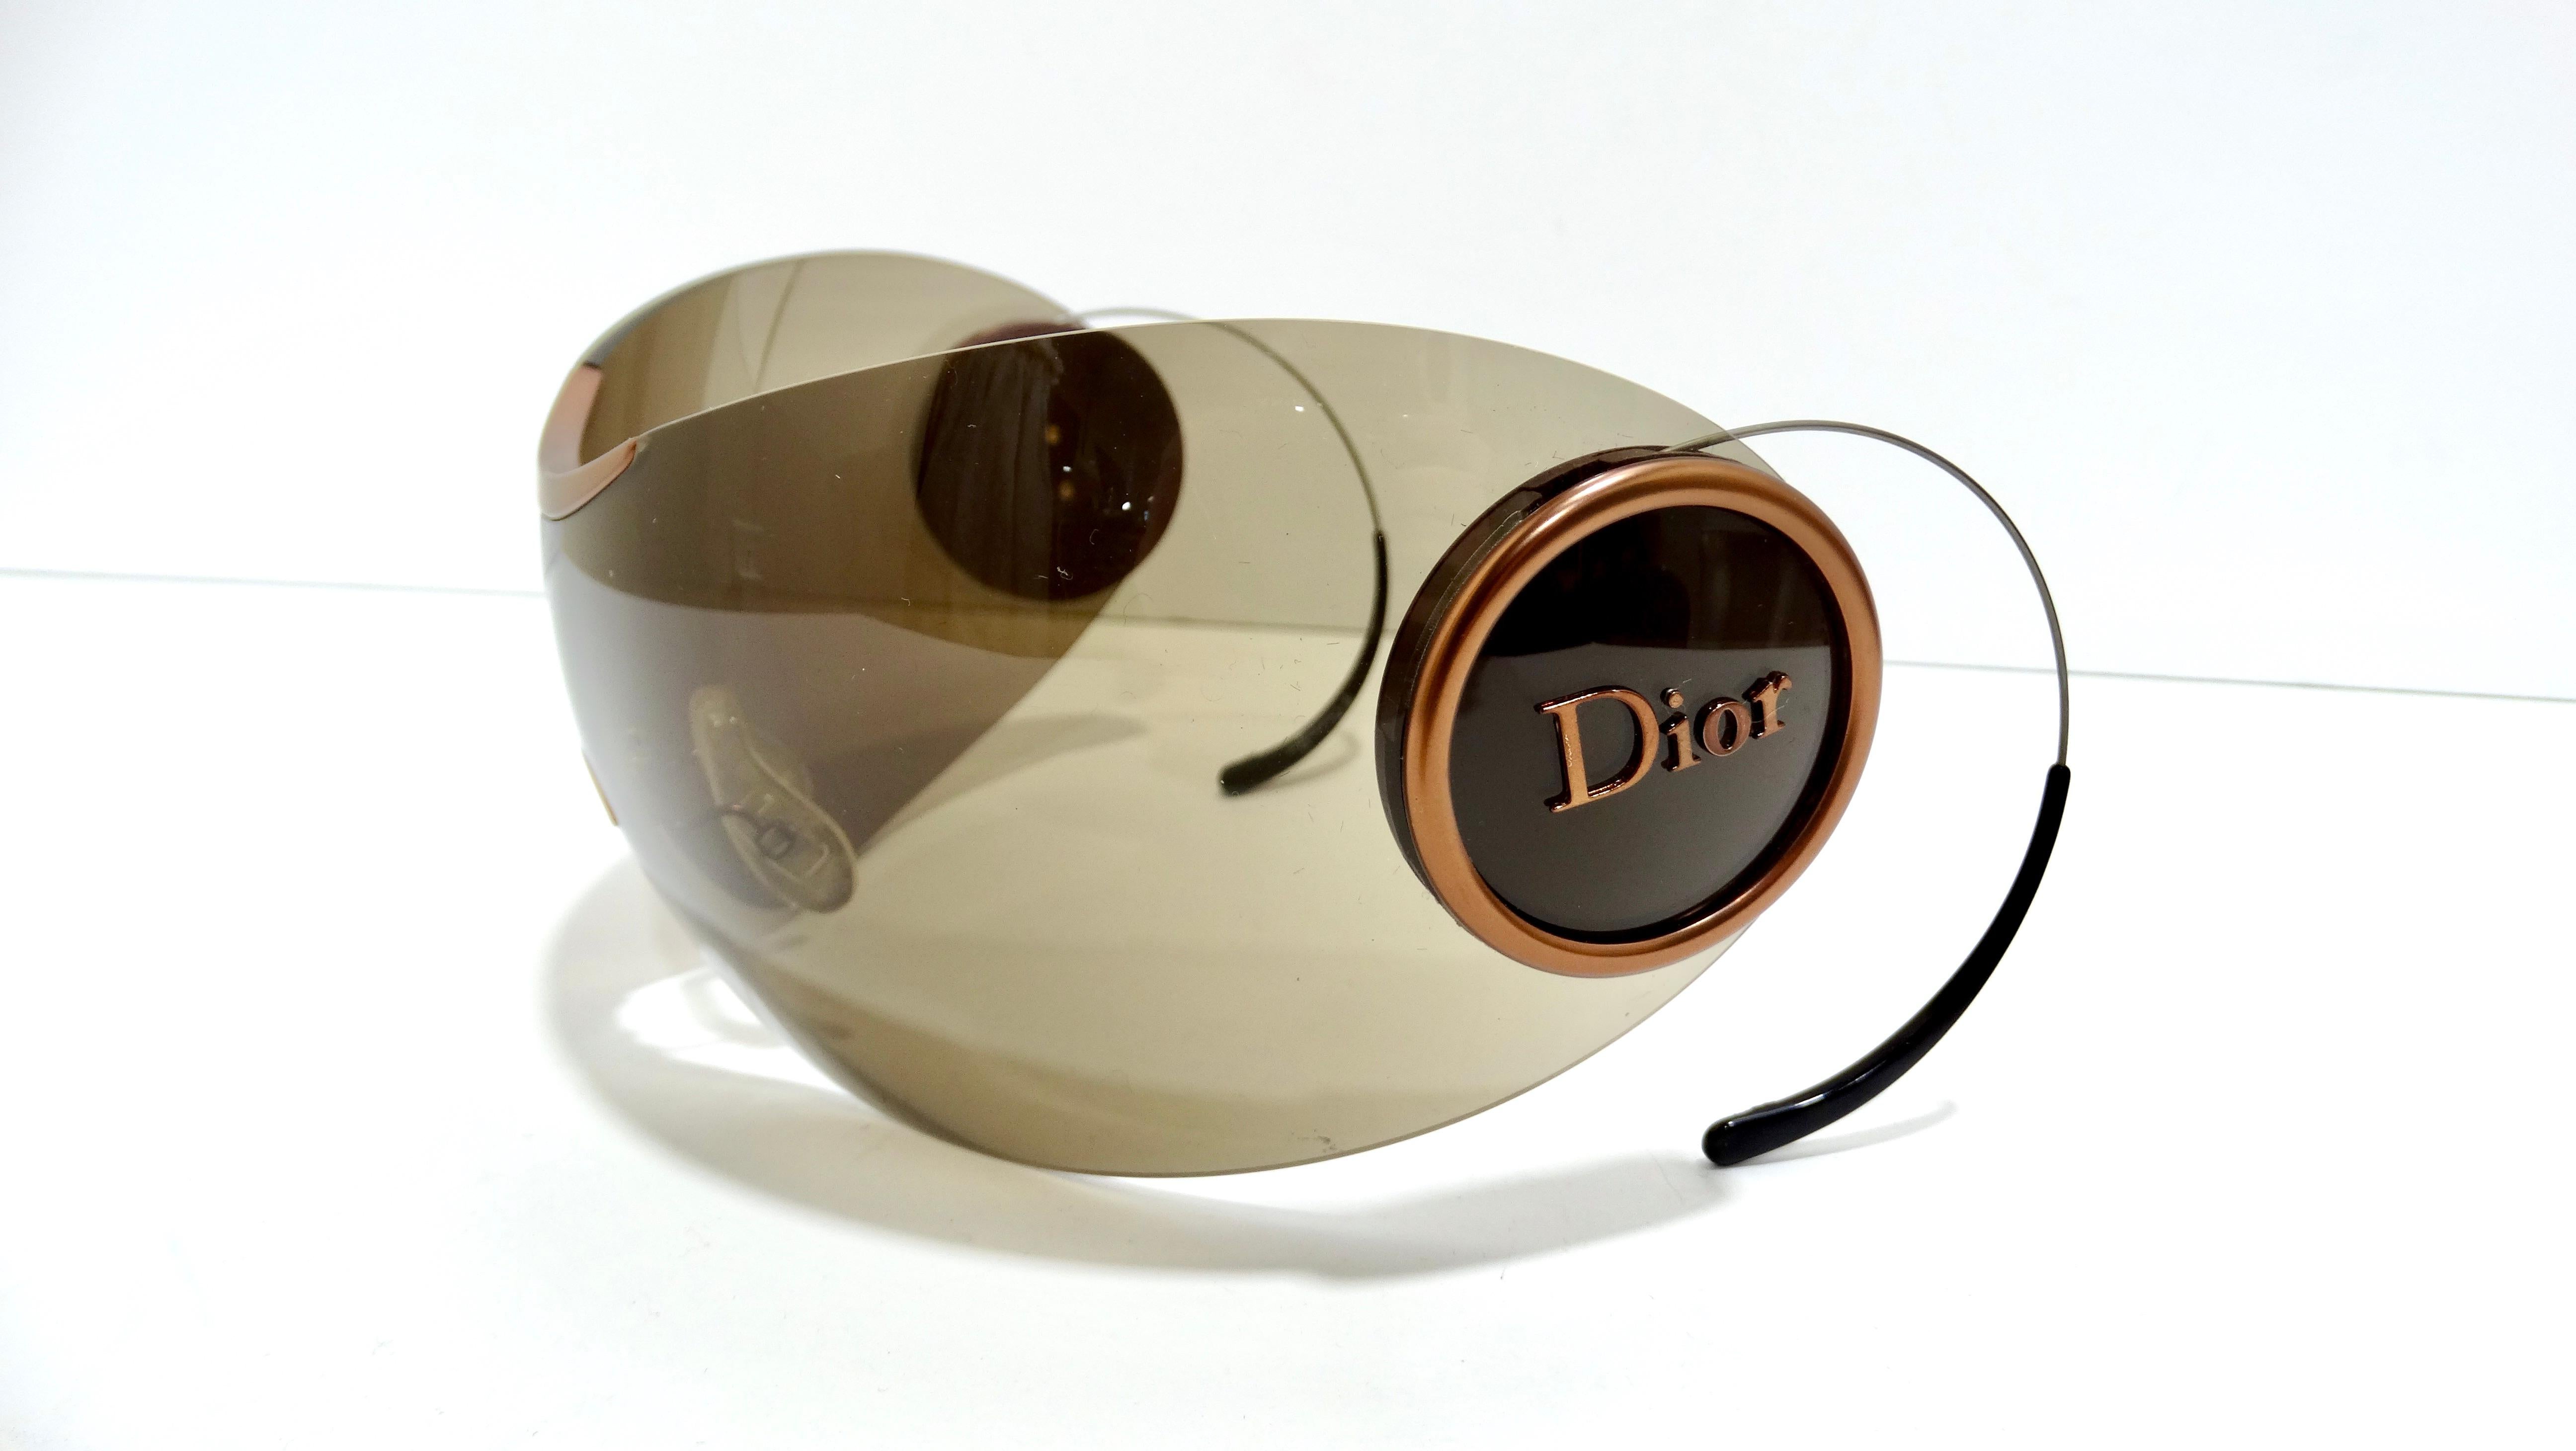 I could bet you that you haven't seen a pair of sunglasses quite like these! These iconic and rare Christian Dior sunglasses are super stylized and simple details that create such a cool look. They have a rimless single piece curved solid brown